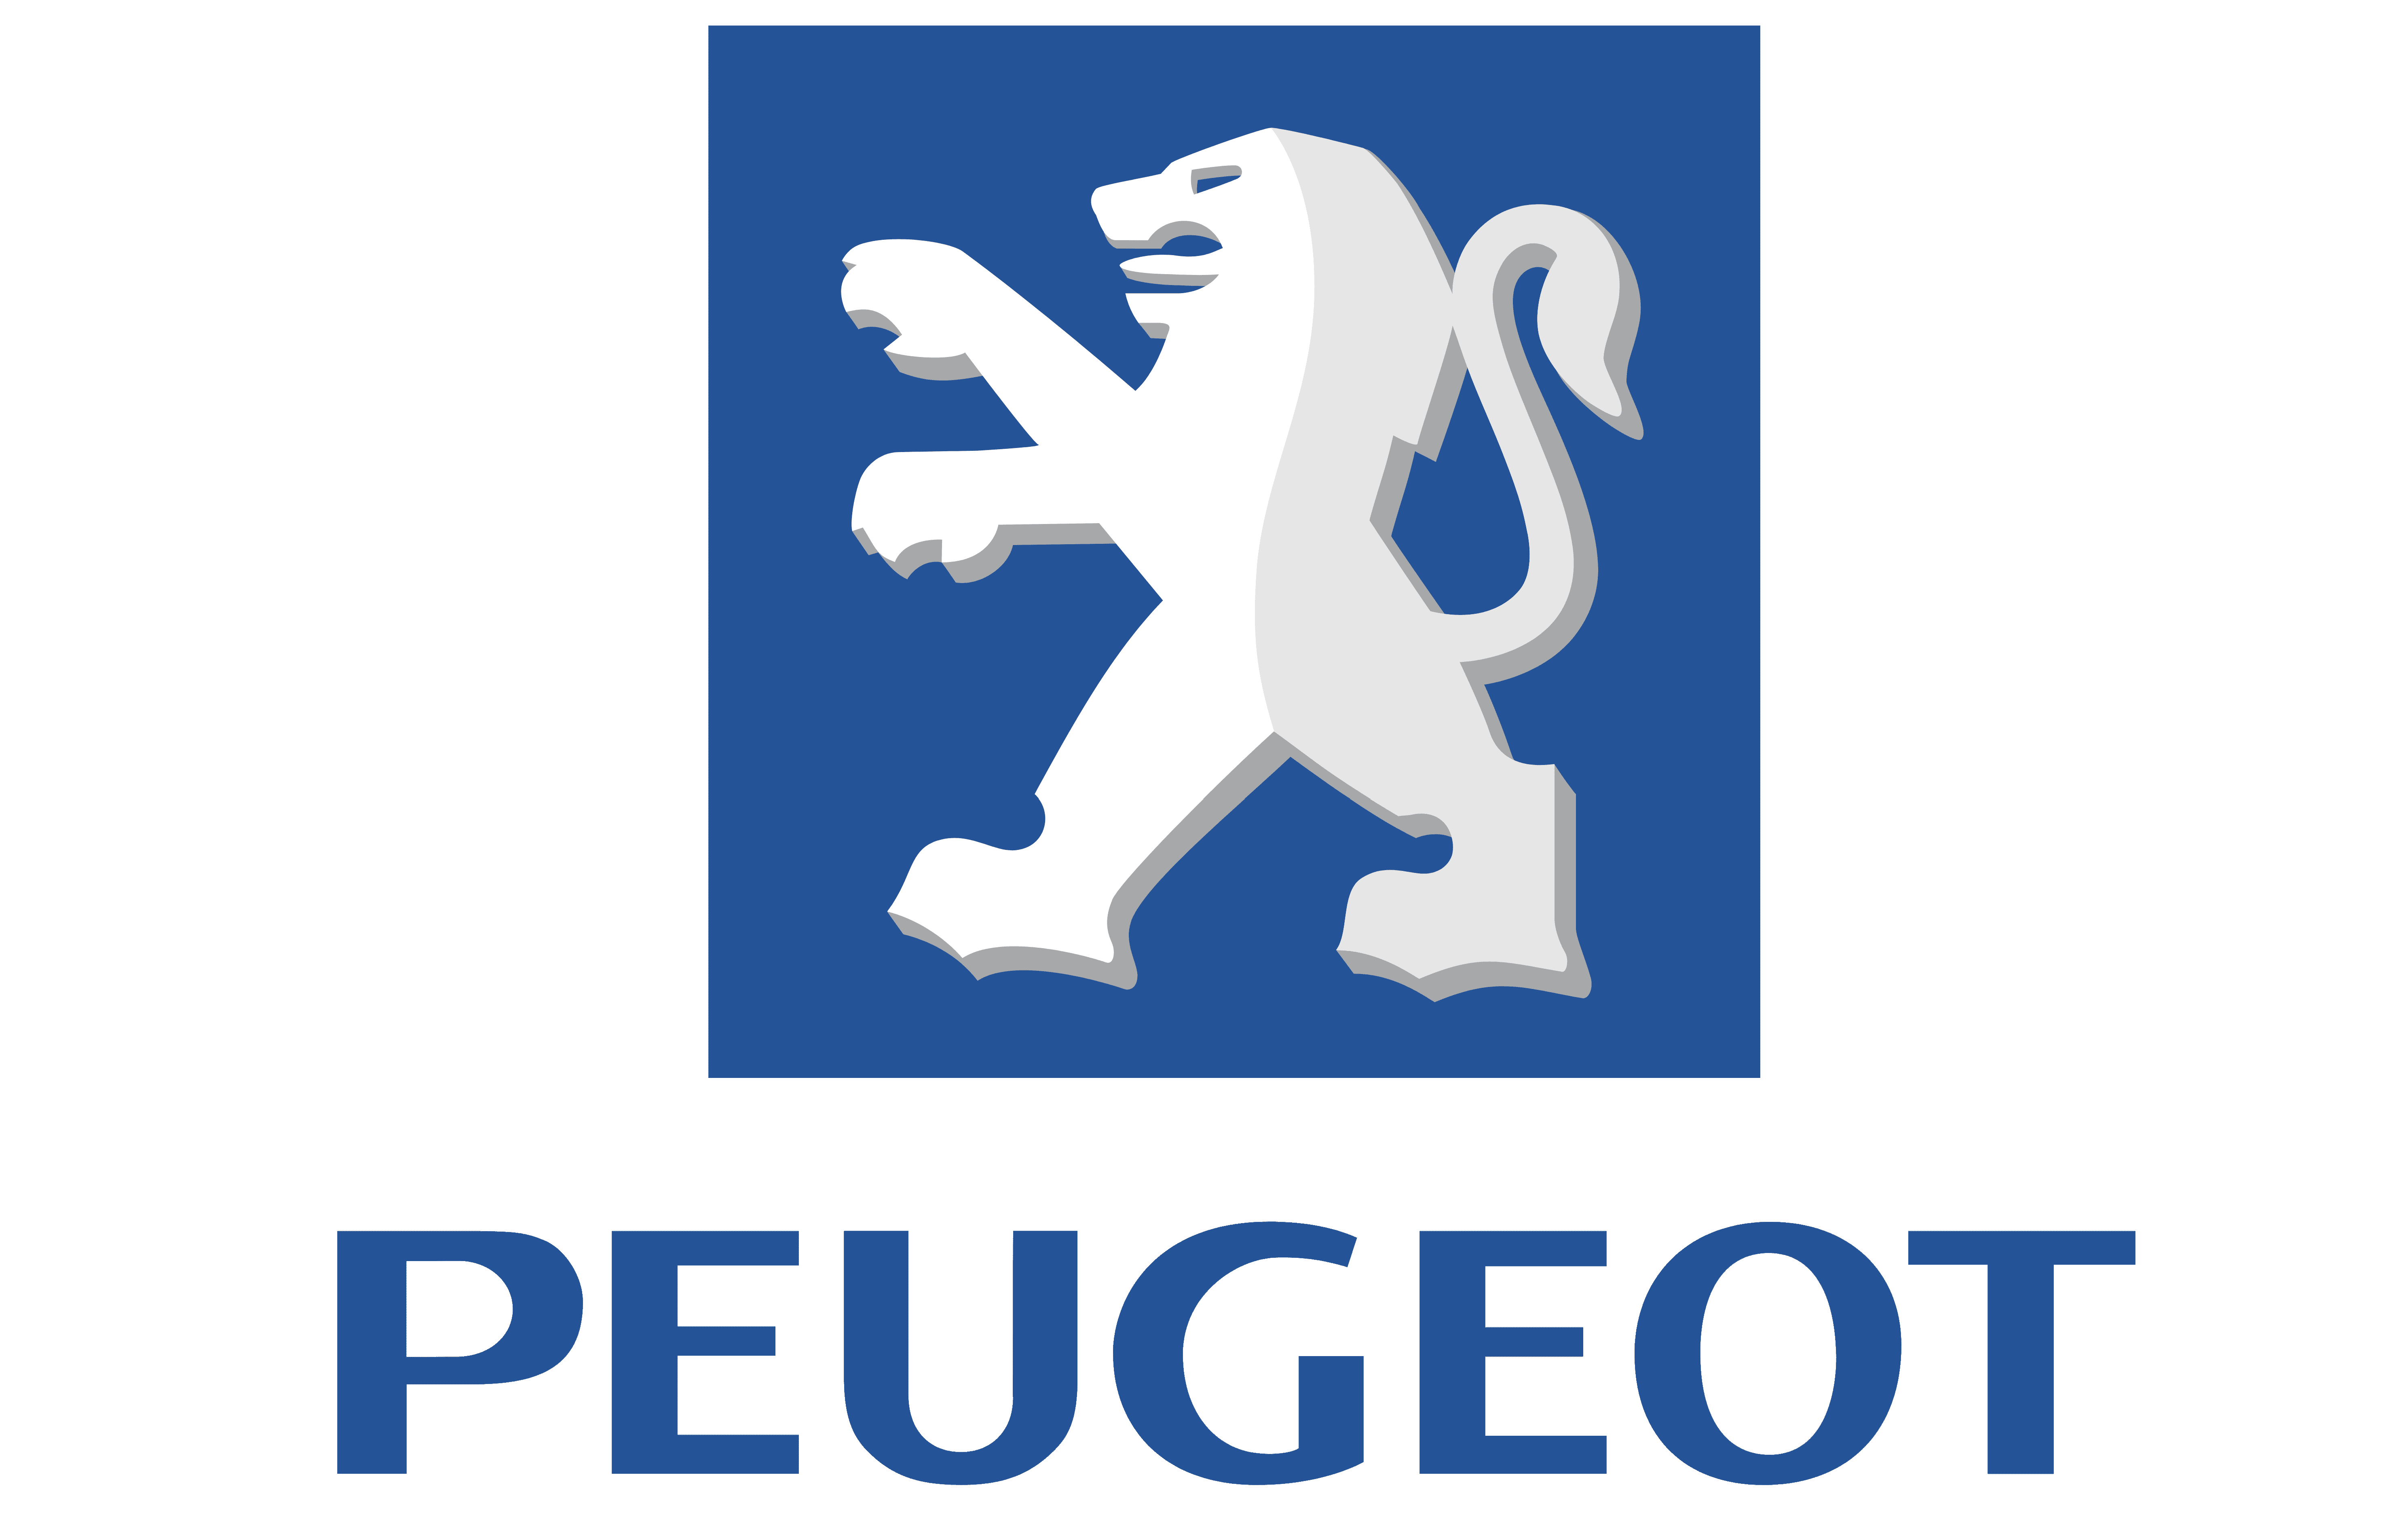 LED Backlit Brand Peugeot Car Logo and Their Name for Toyota